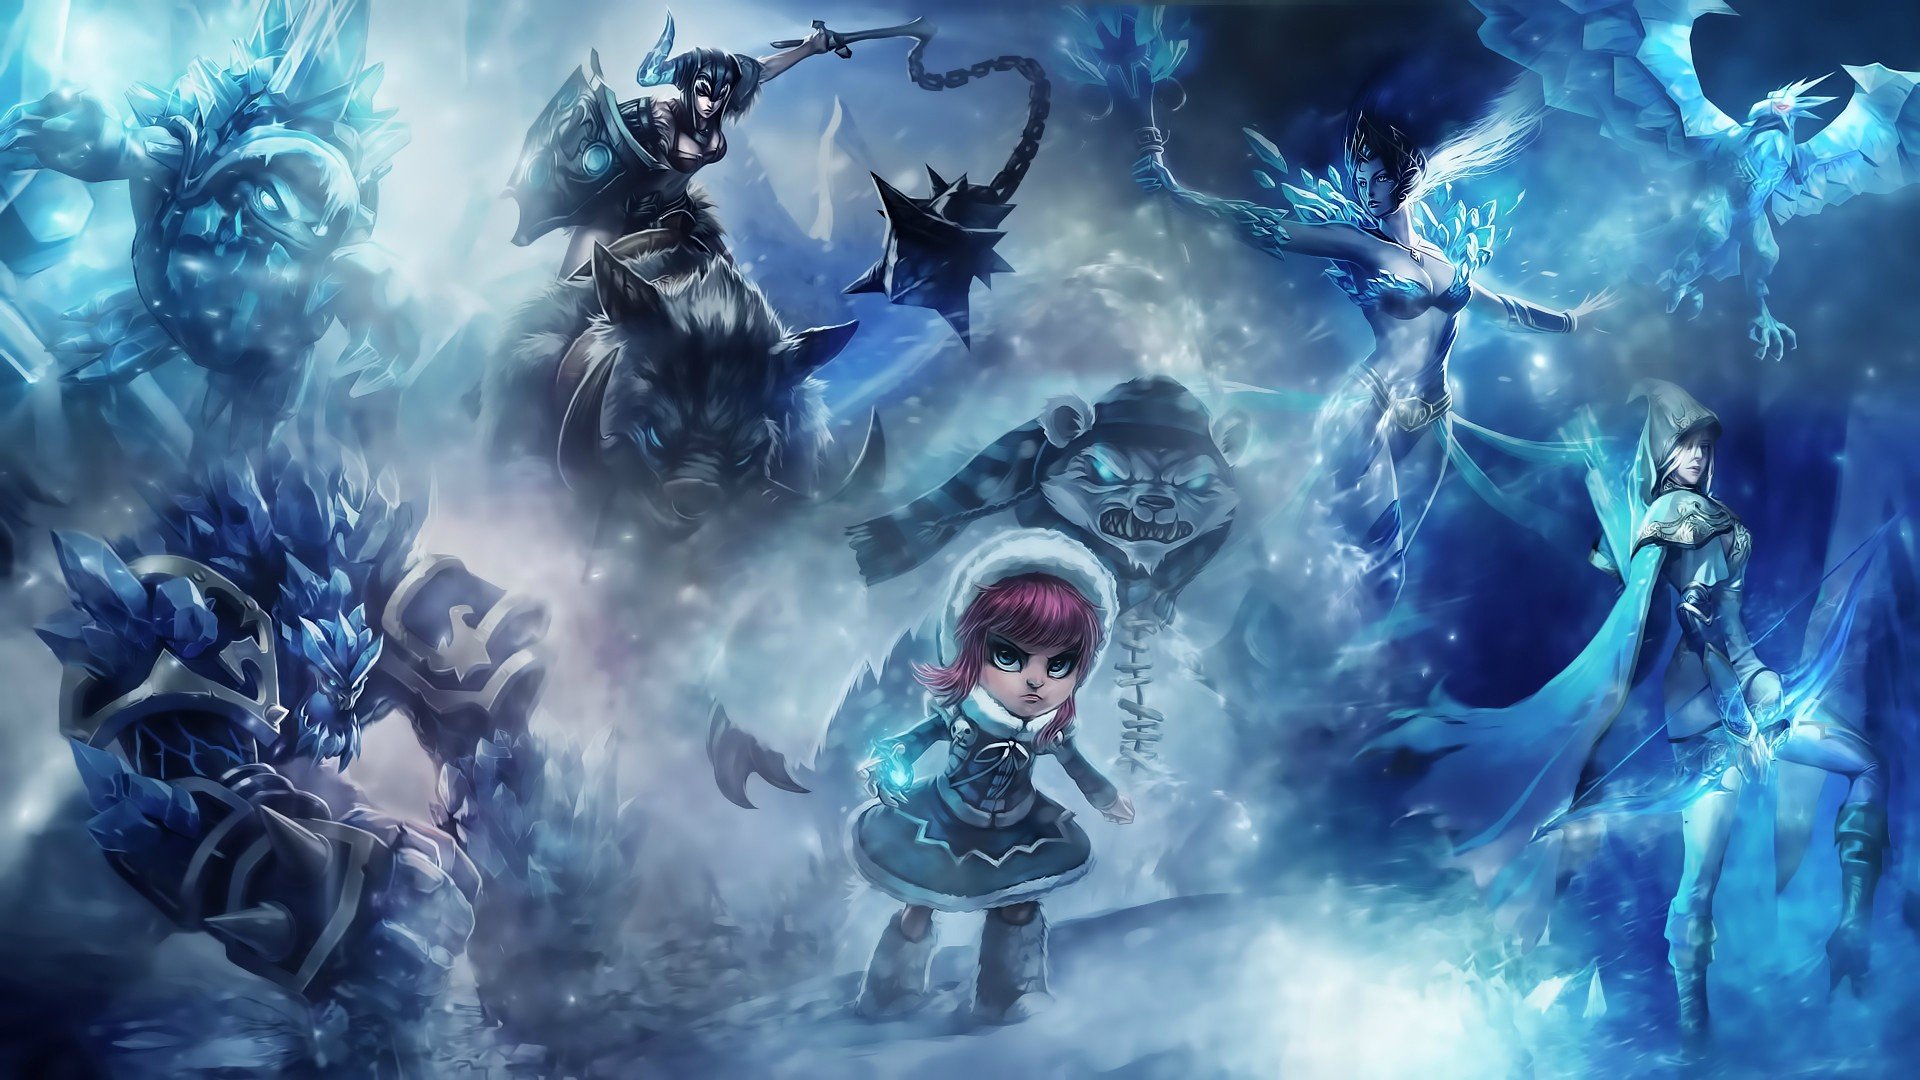 20 Anivia League Of Legends Hd Wallpapers Background Images Images, Photos, Reviews